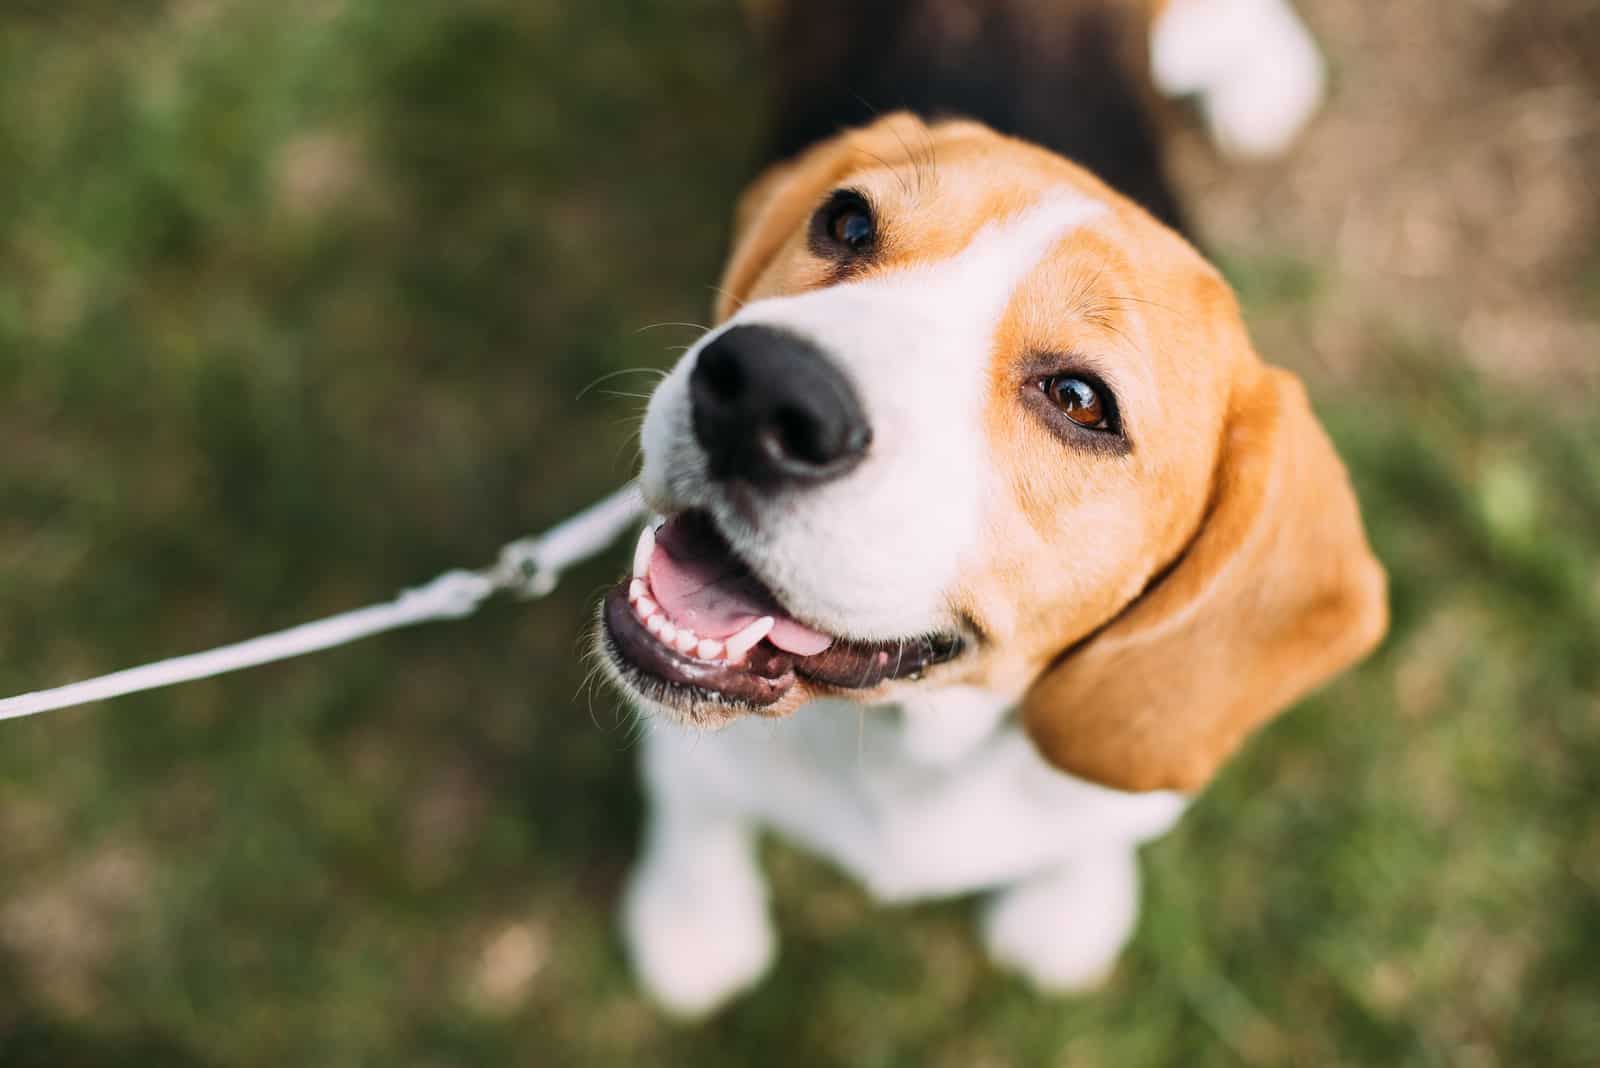 How Much Do Beagles Cost? Puppy And Adult Dog Life Expenses